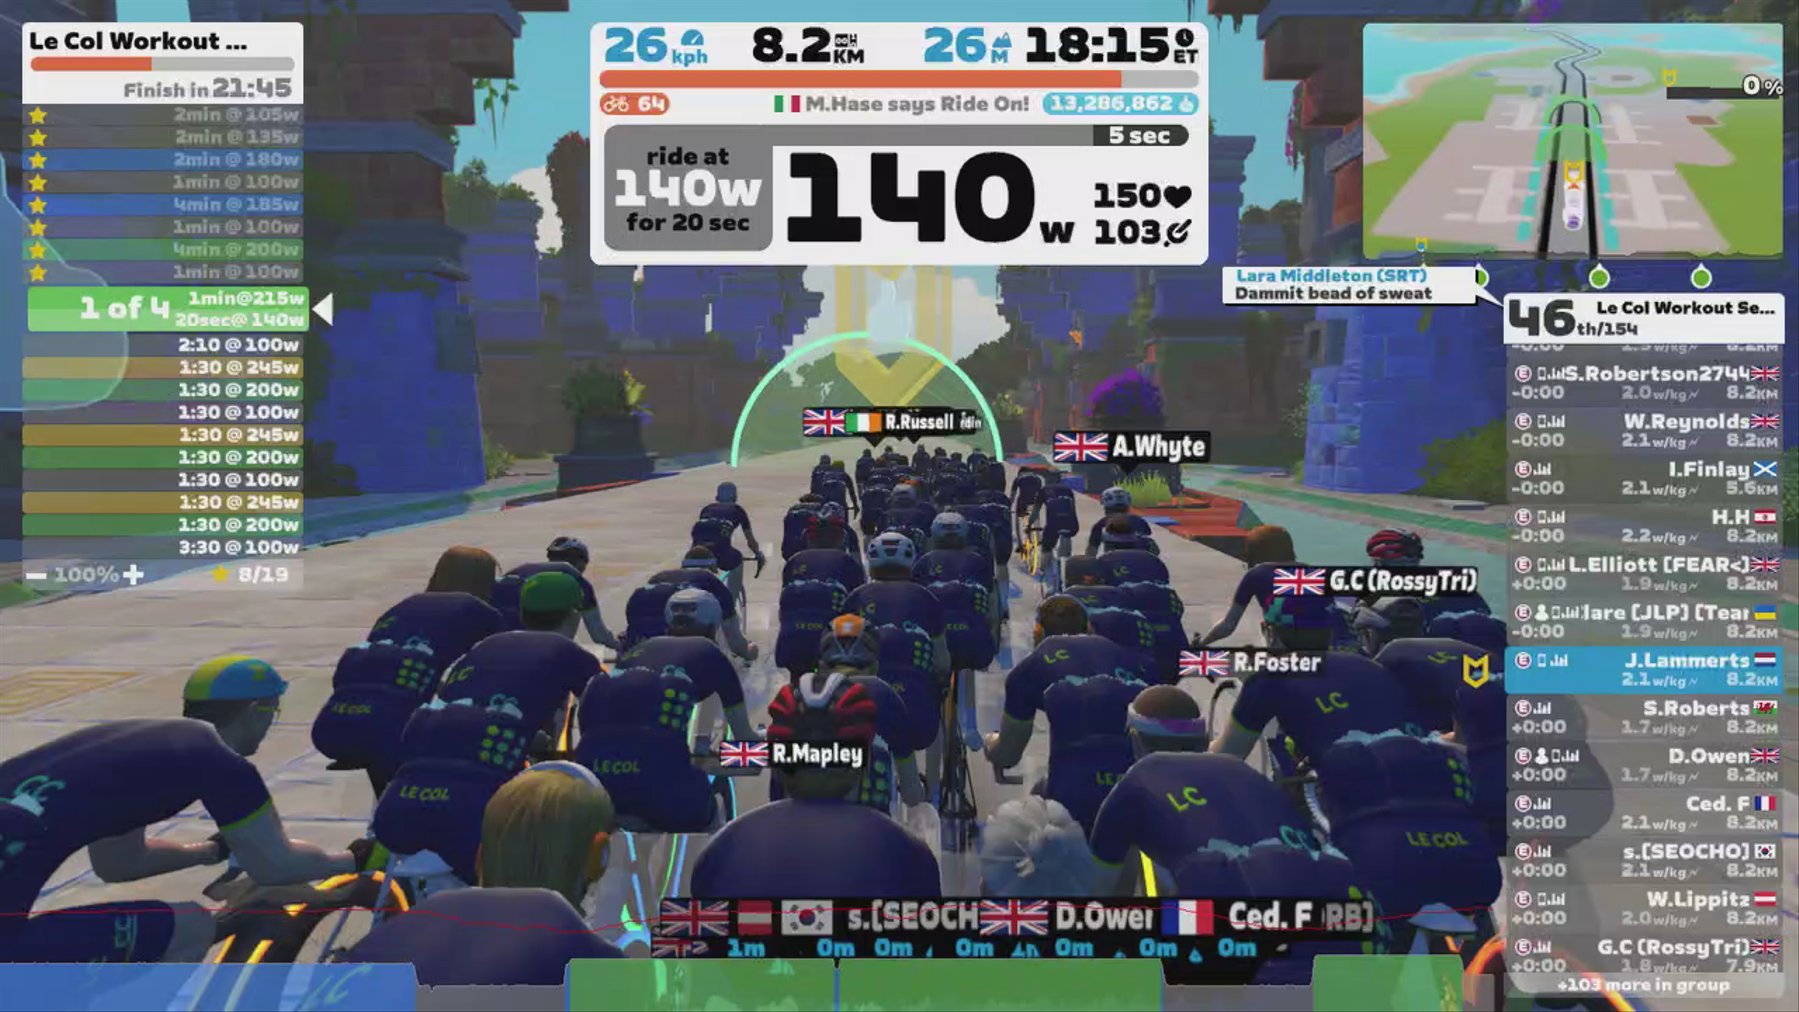 Zwift - Group Workout: Le Col Workout Sessions Weekend Tune Up Ramps (E) on Sugar Cookie in Watopia